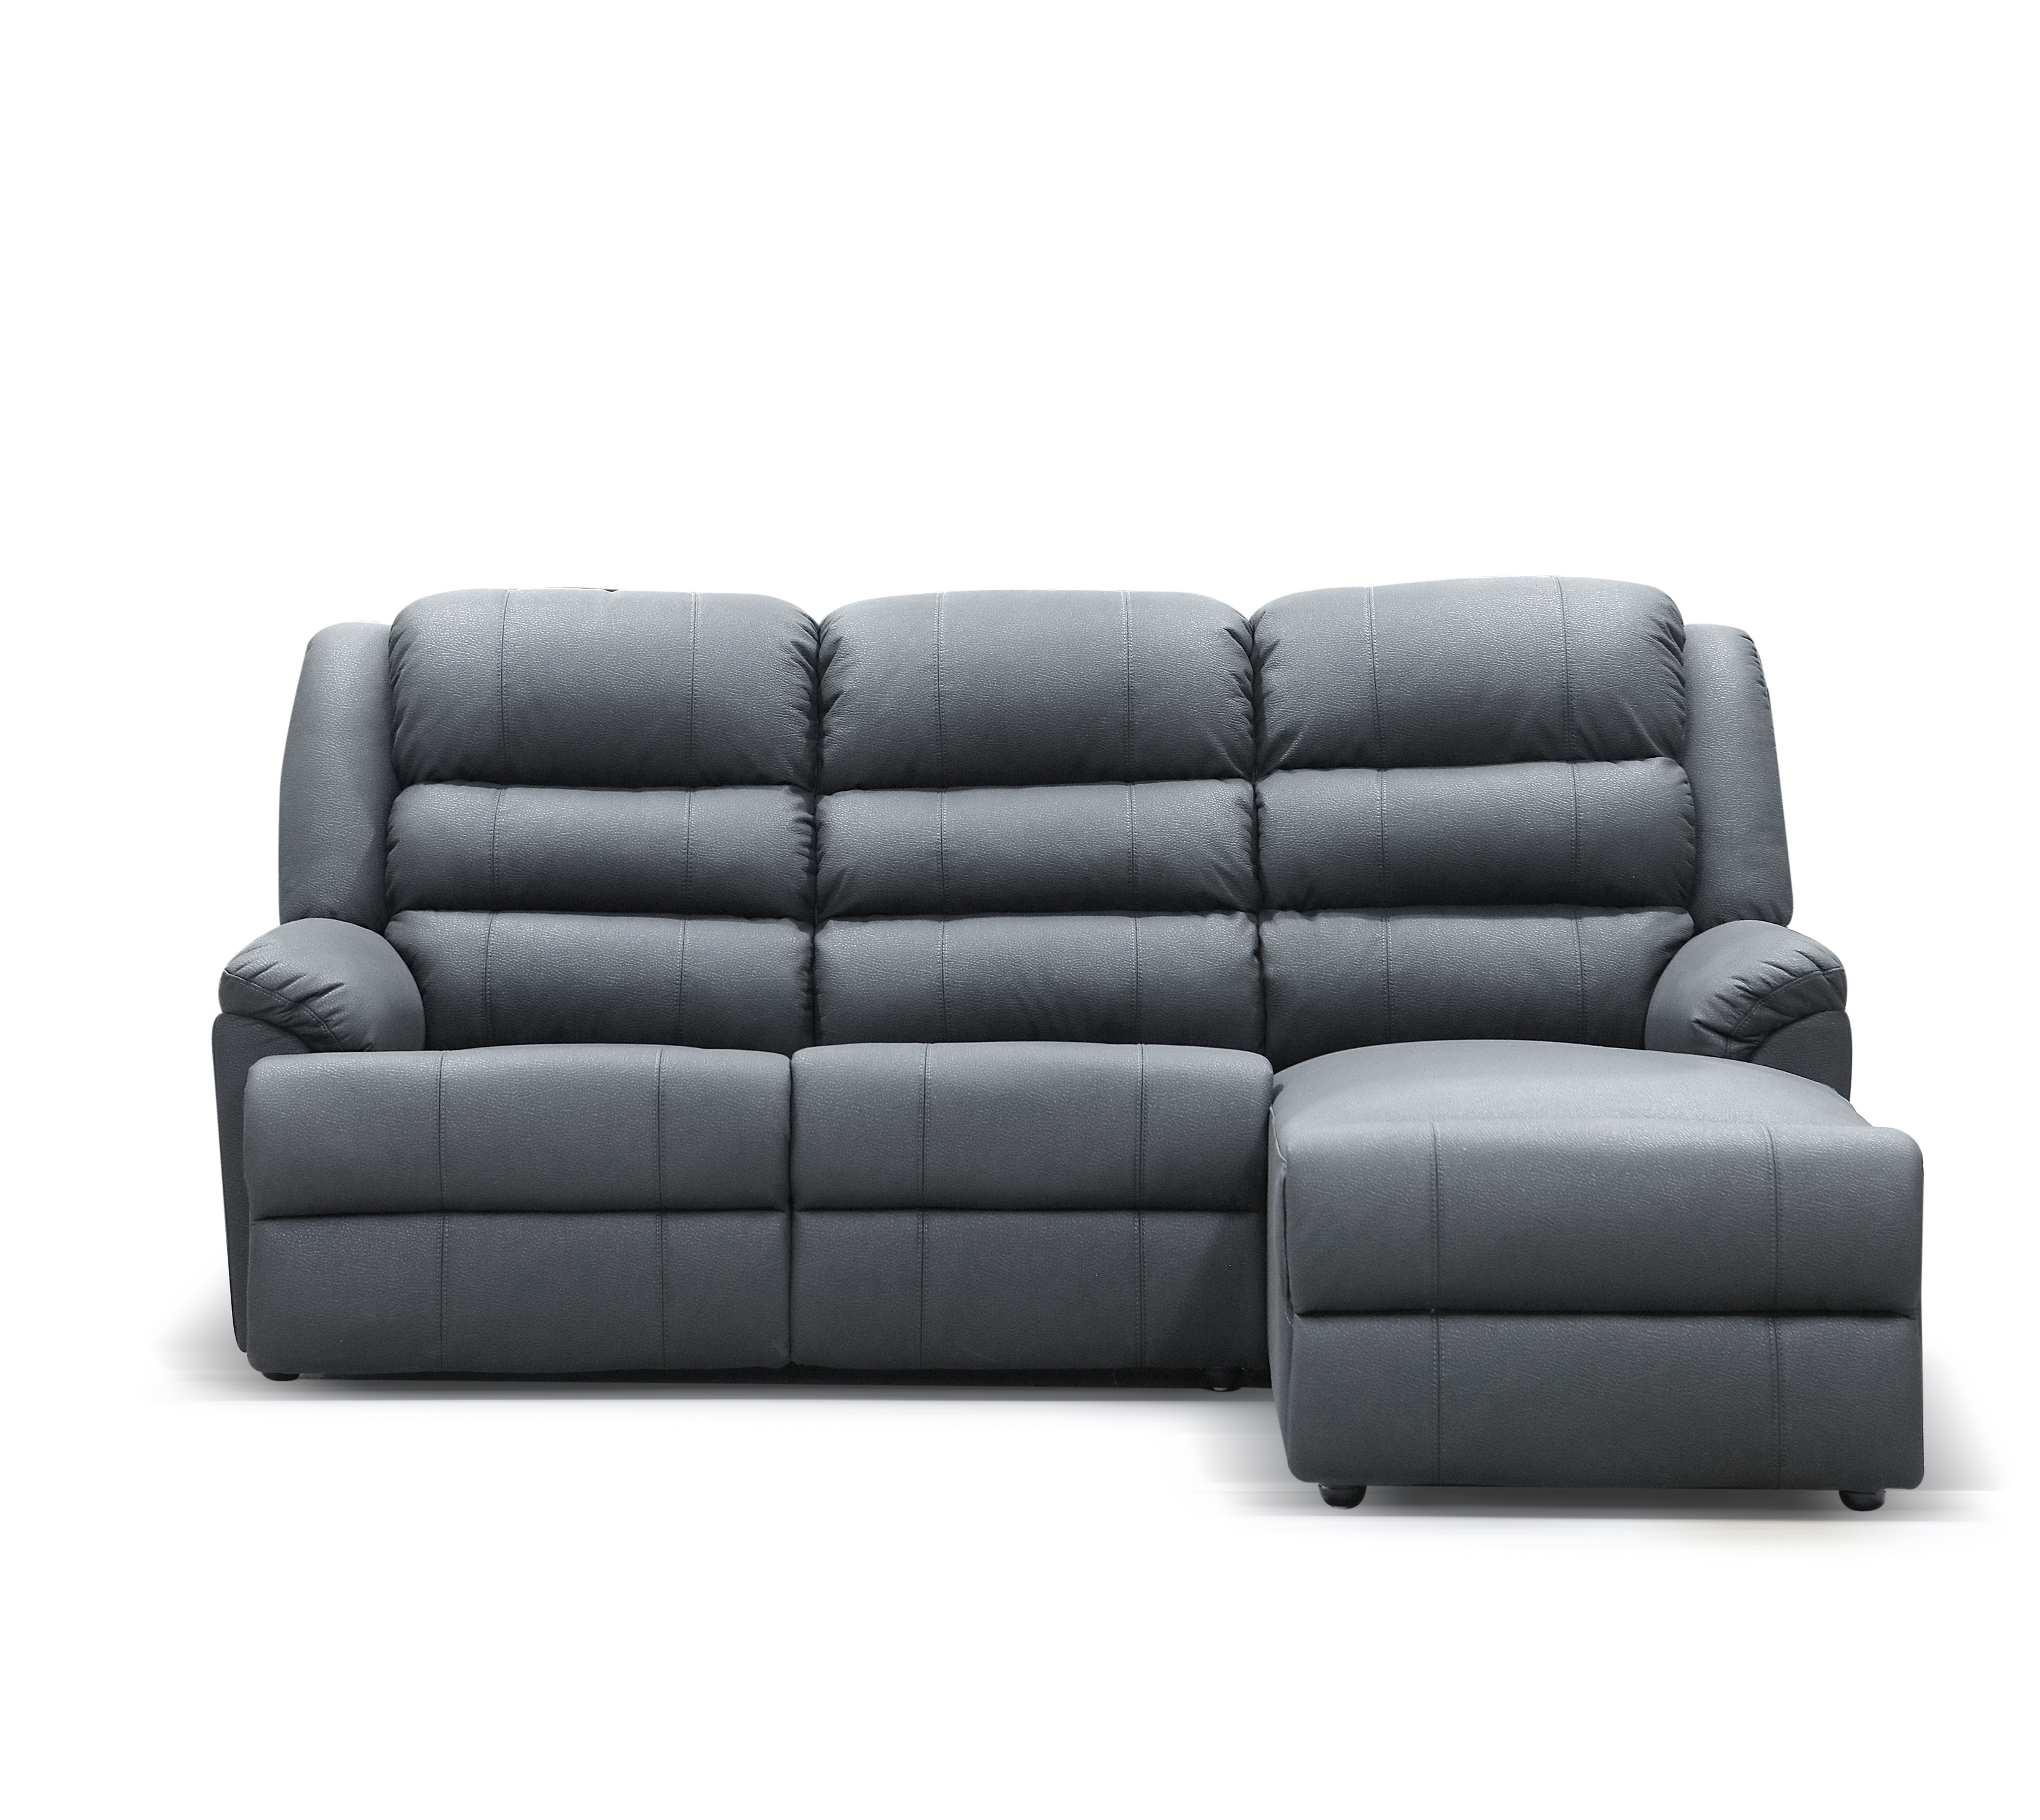 Summitt - 3 Seater Chaise Charcoal 2